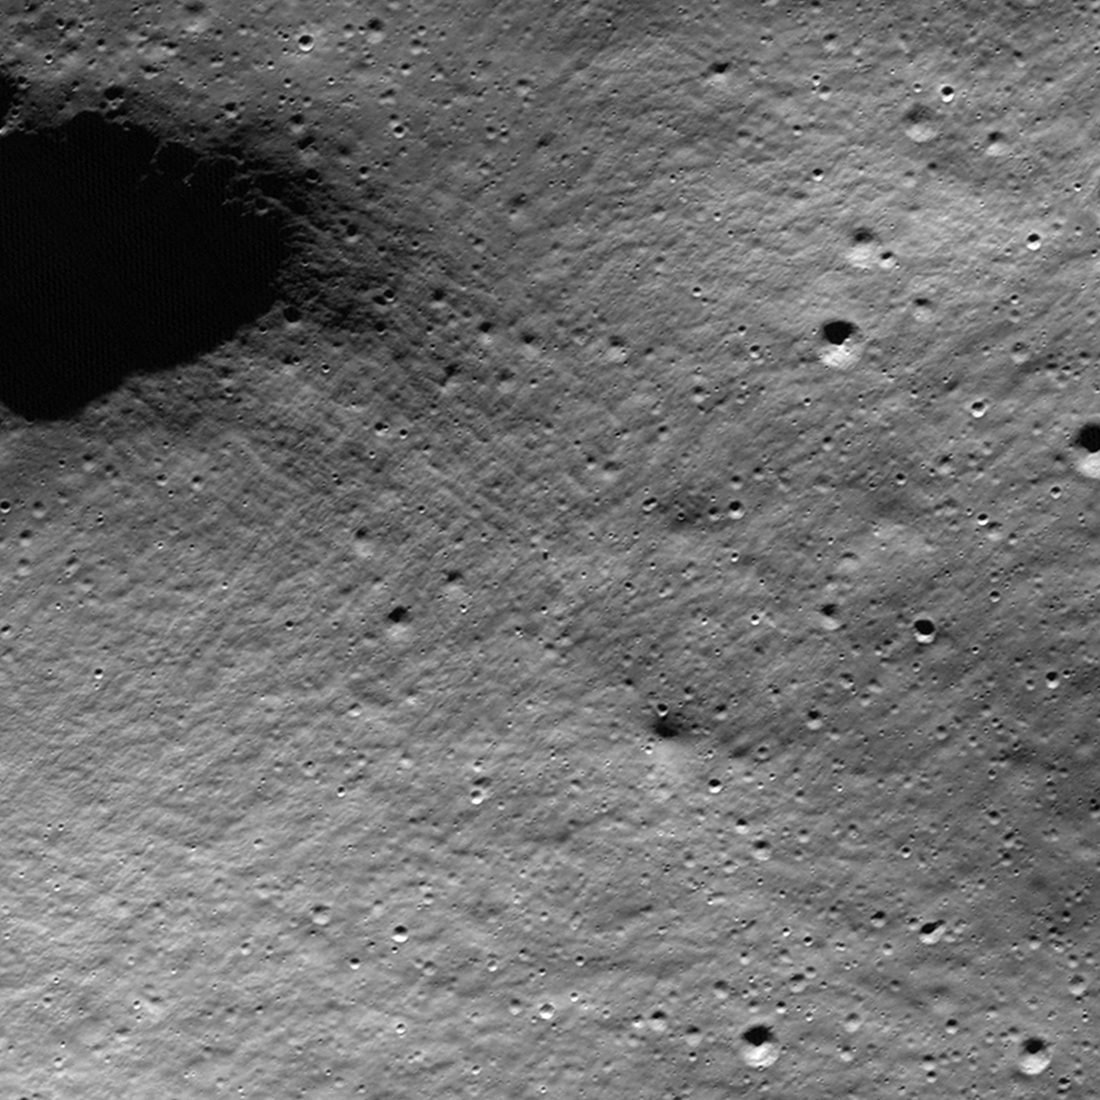 animation of two grayscale images (before and after) of Moon's rocky surface from above, with a small white dot at the center of the frame: IM-1 lander